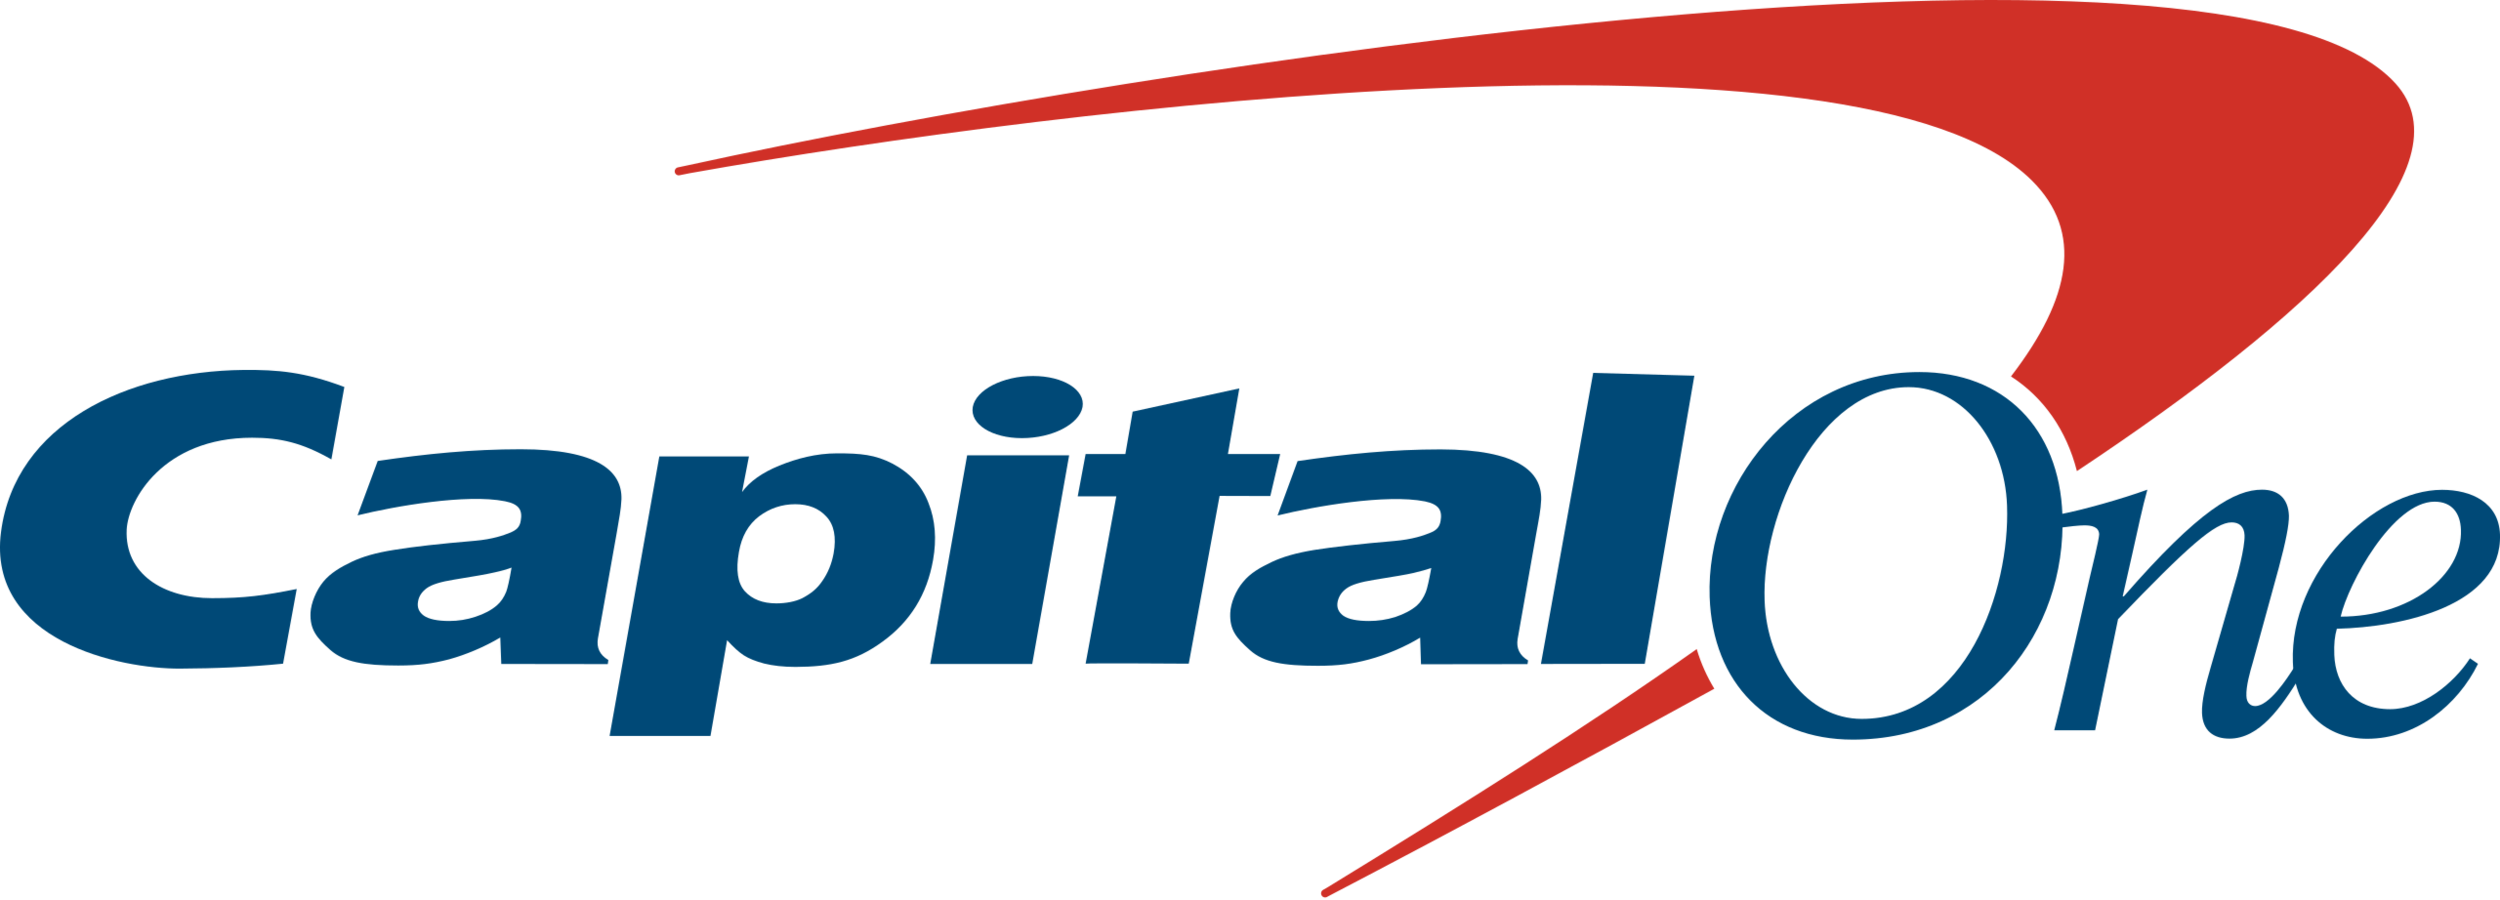 Capital One.svg.png